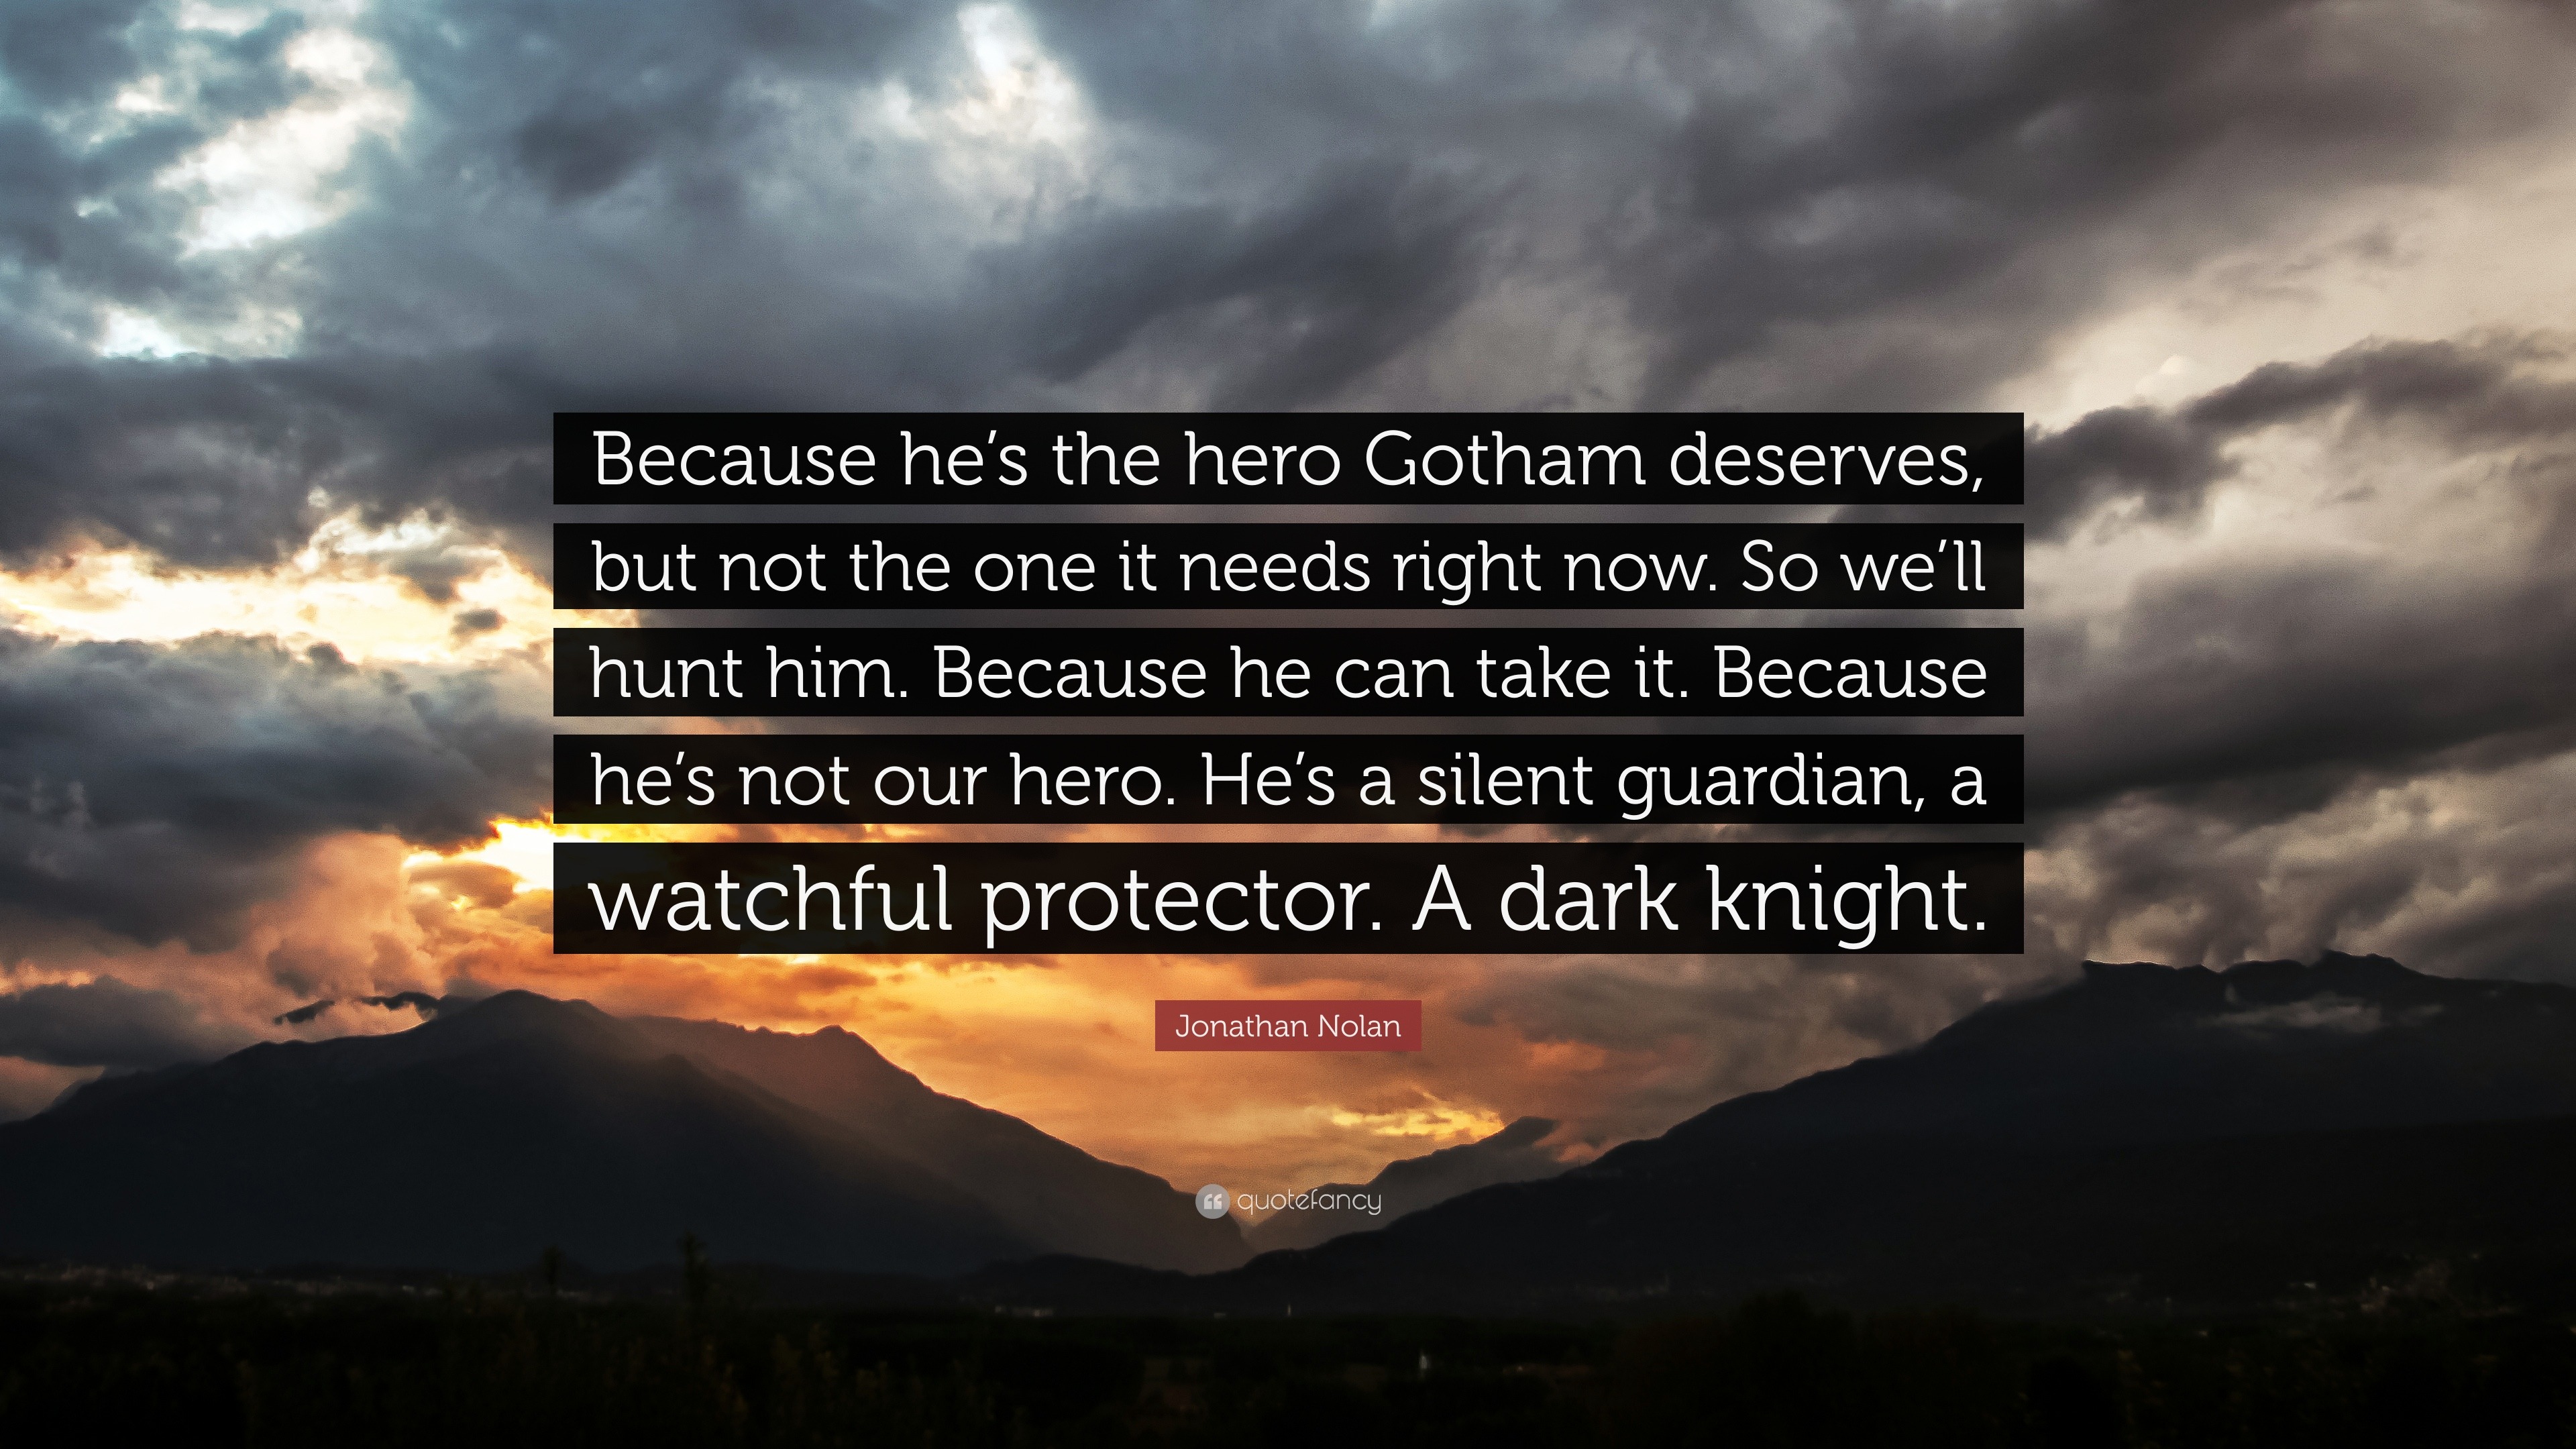 Jonathan Nolan Quote: “Because he's the hero Gotham deserves, but not the  one it needs right now. So we'll hunt him. Because he can take it. Be...”